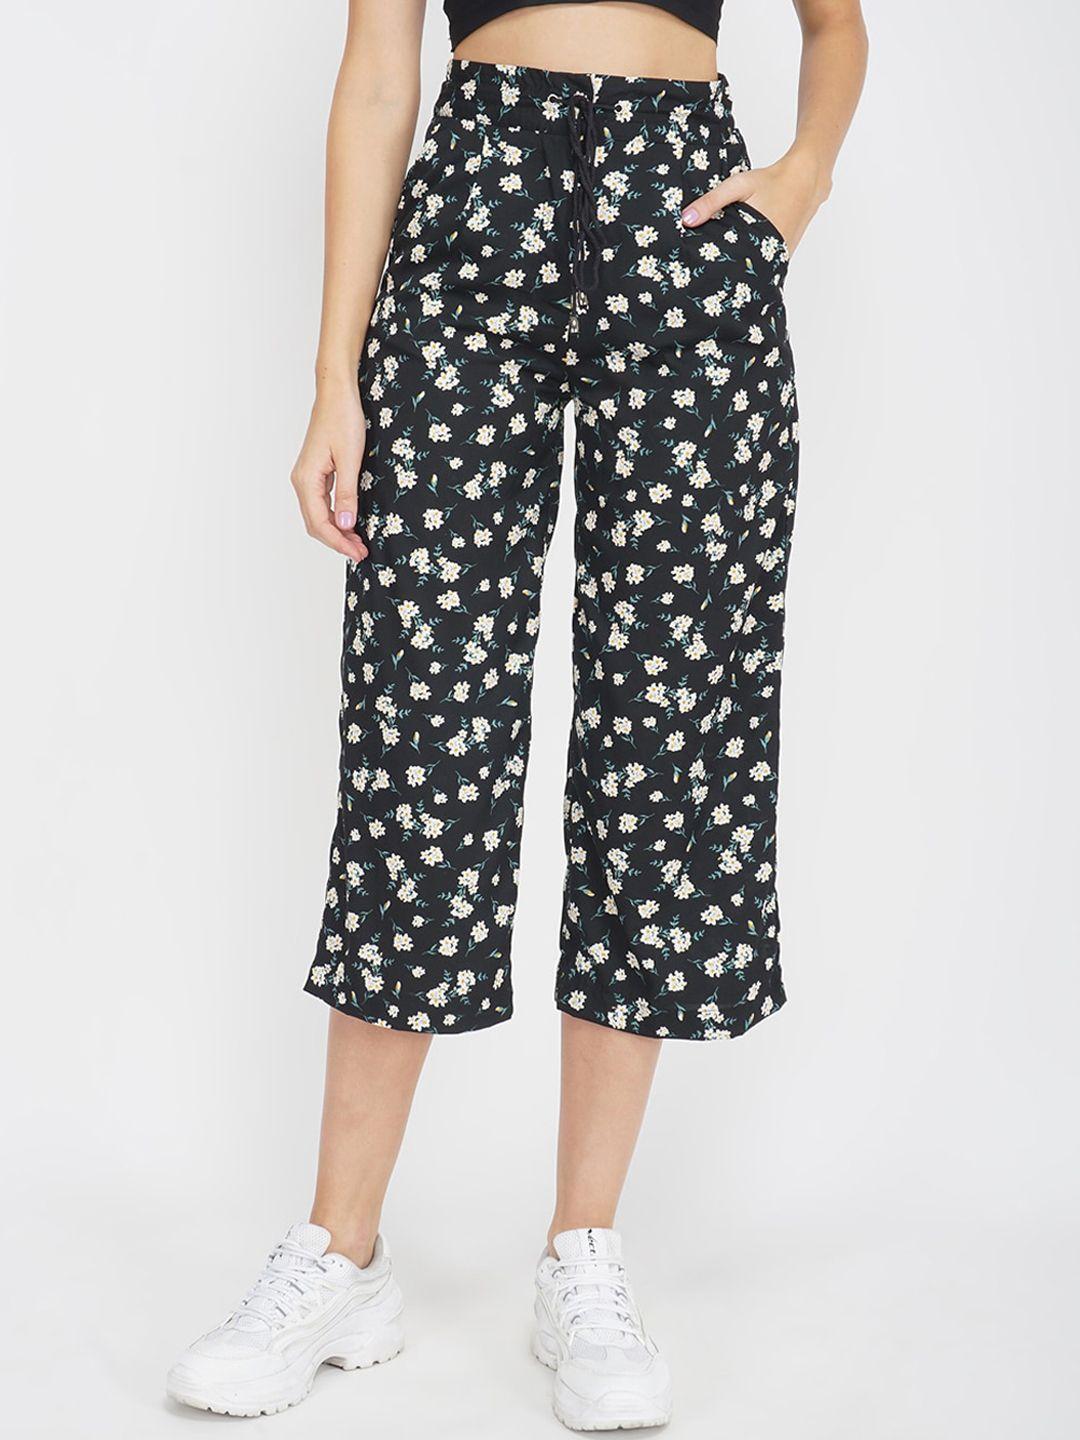 oxolloxo women black floral printed high rise culottes trousers